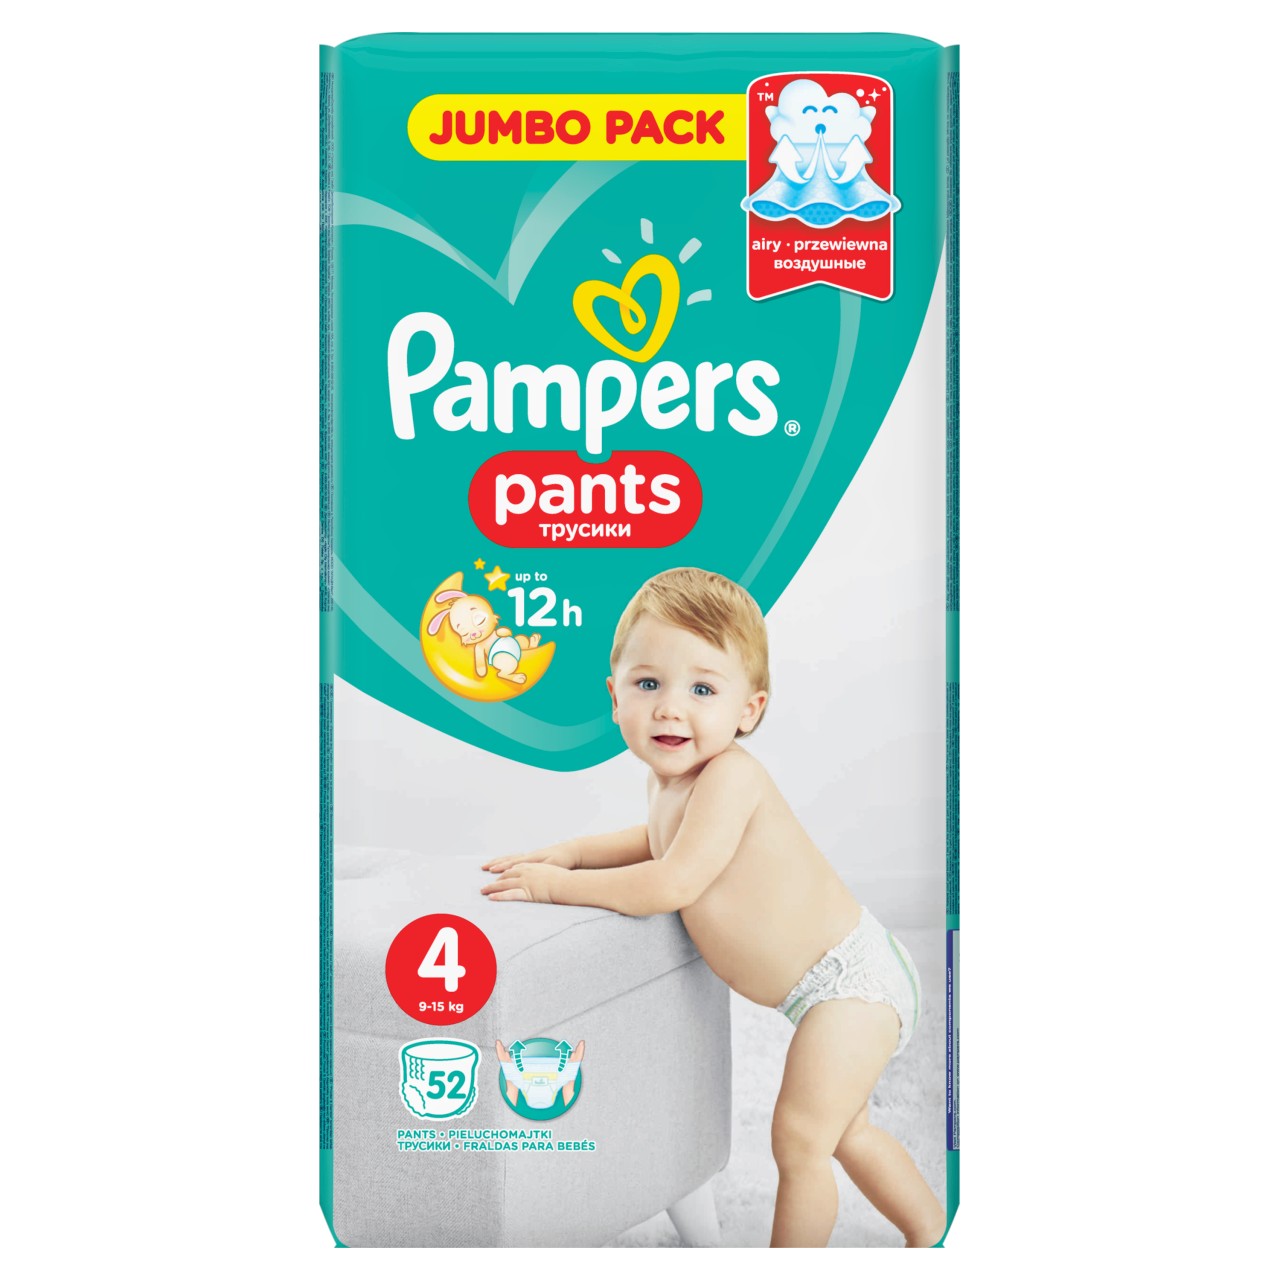 dcp j715w pampers